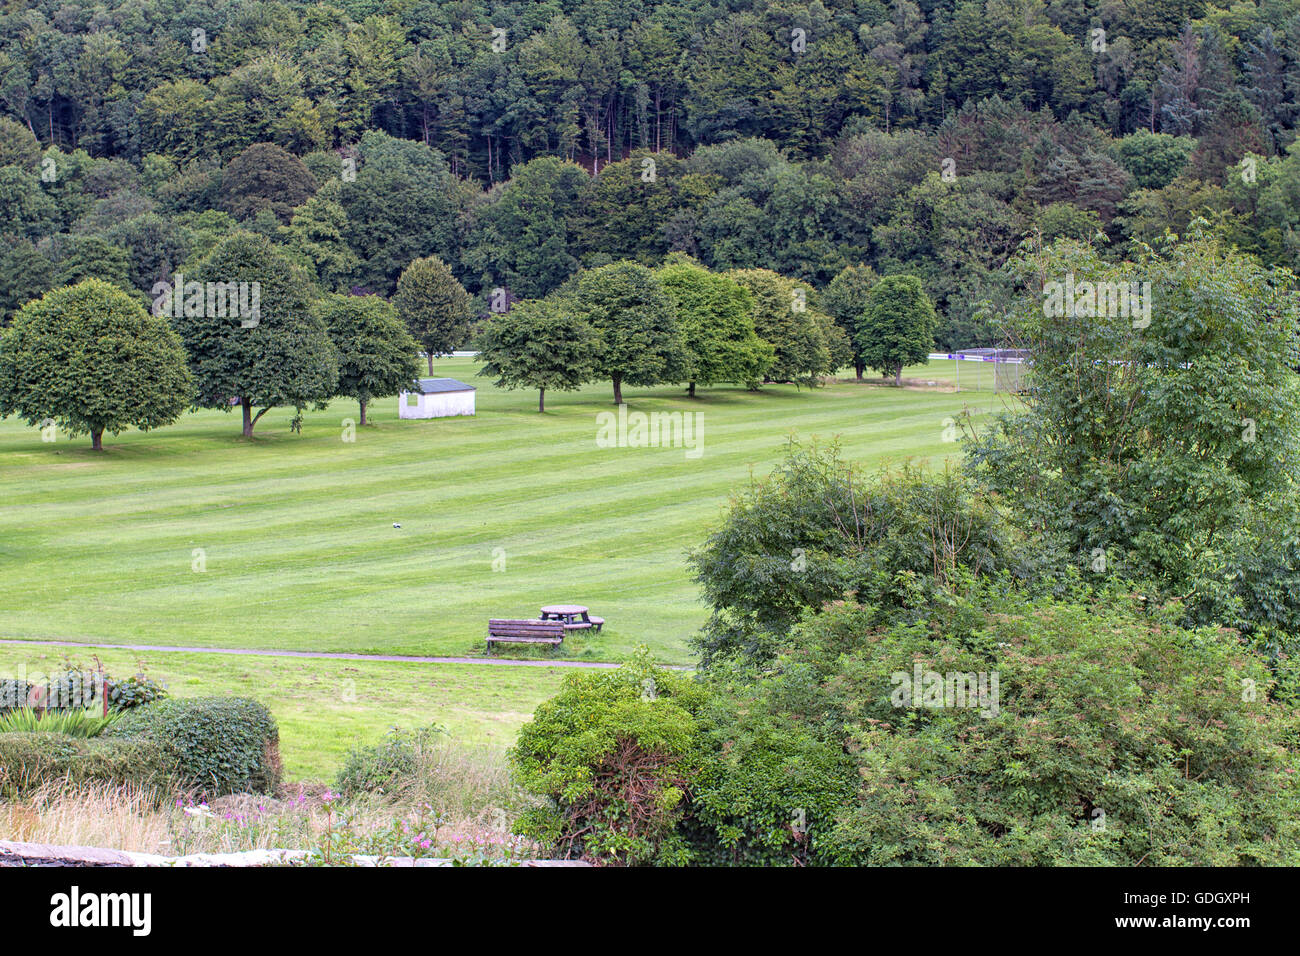 View of Llandysul playing fields in Ceredigion, Wales.  Freshly mowed playing field with stripes. Stock Photo